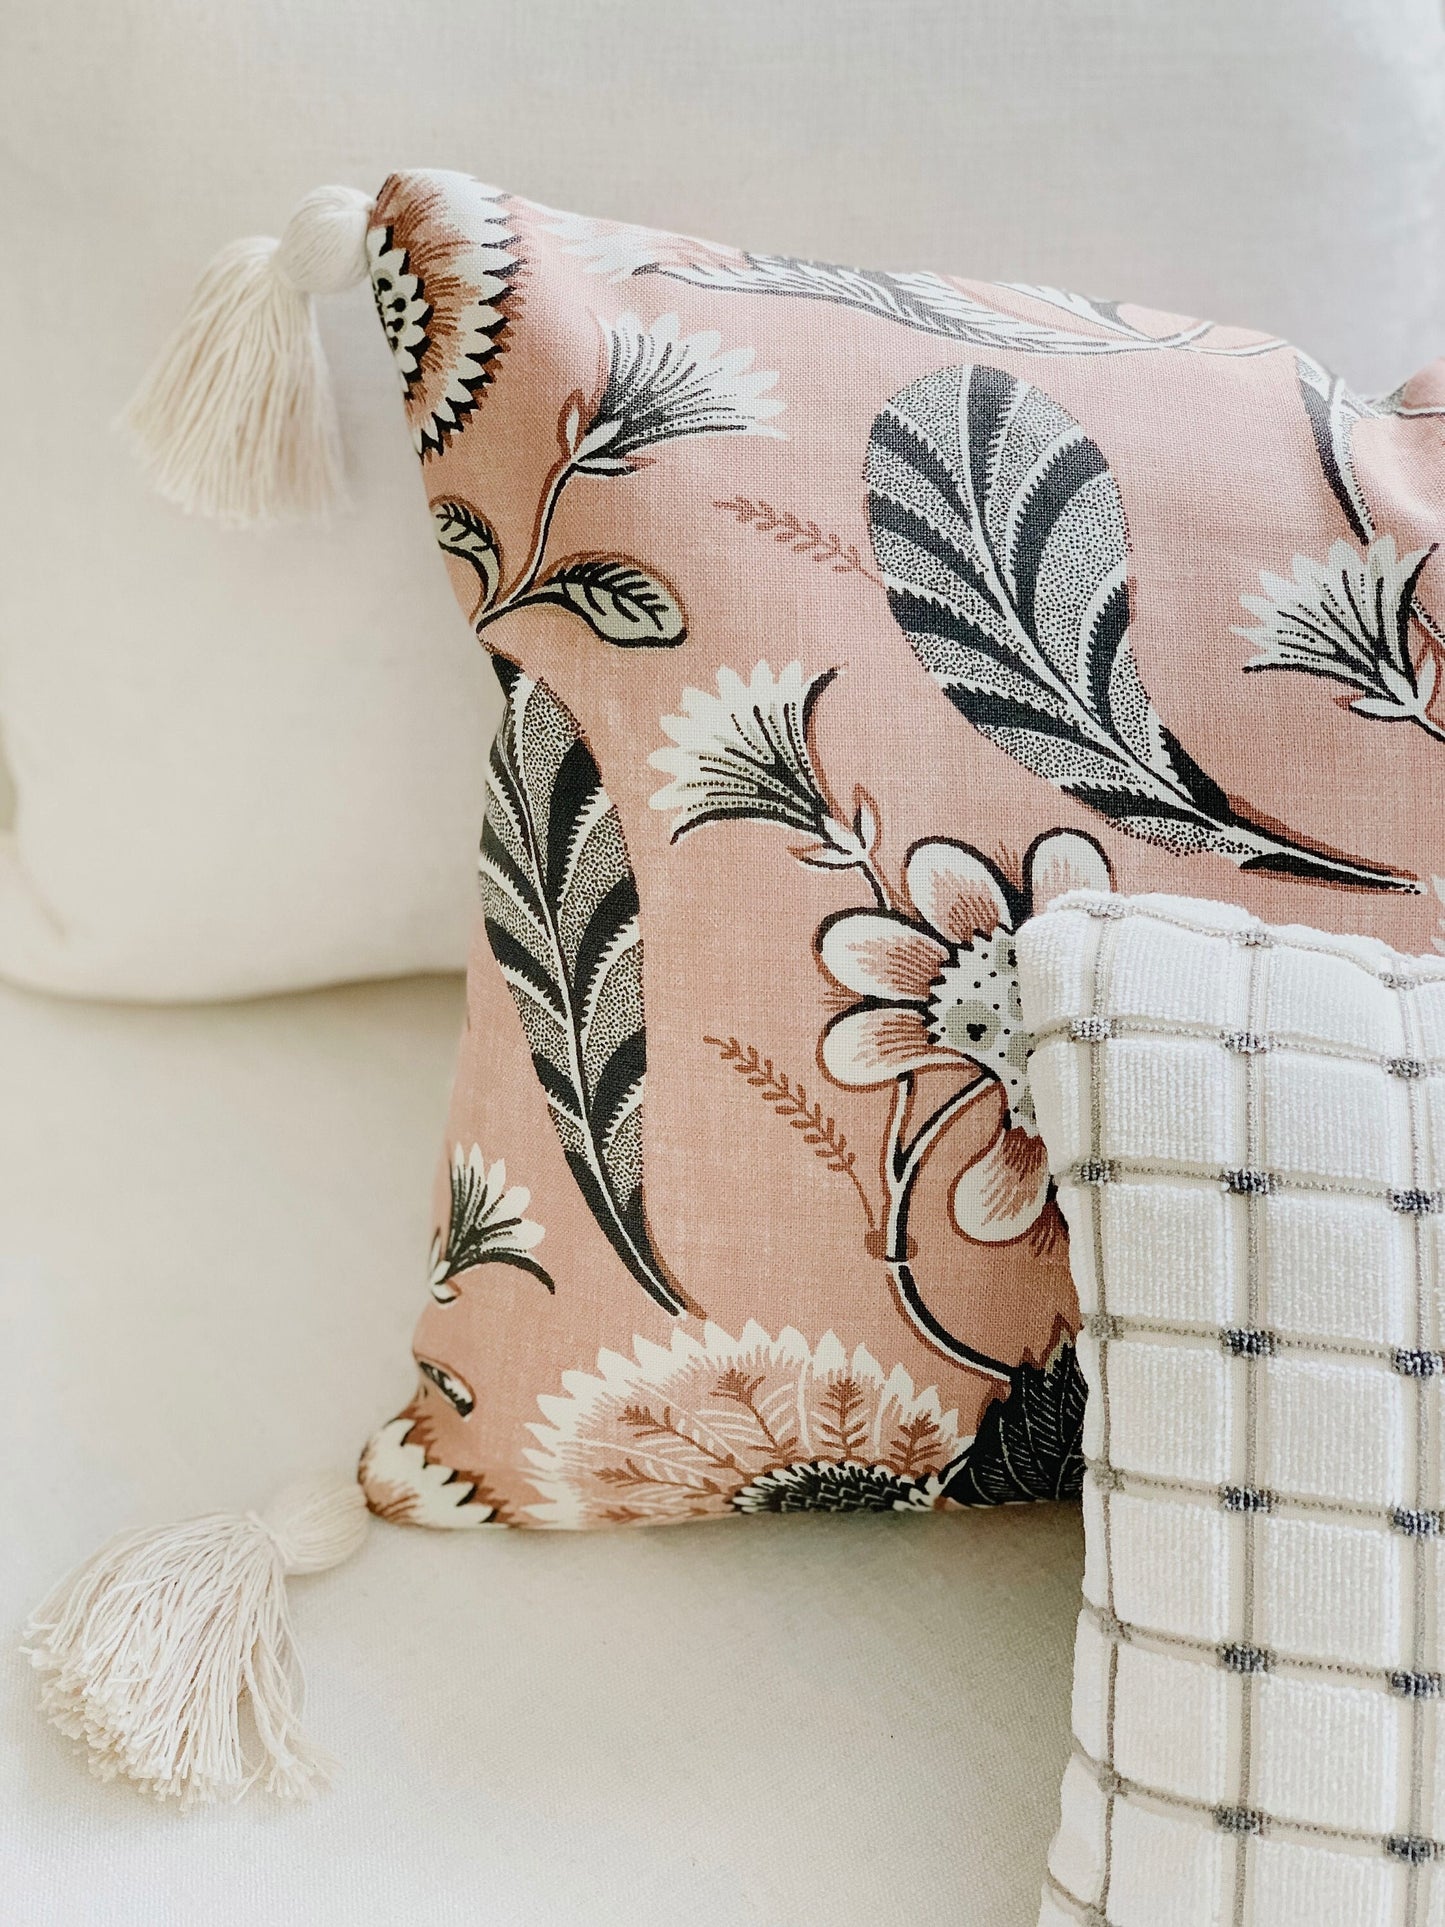 Decorative lumbar pillow in blush floral fabric with tassels on white sofa